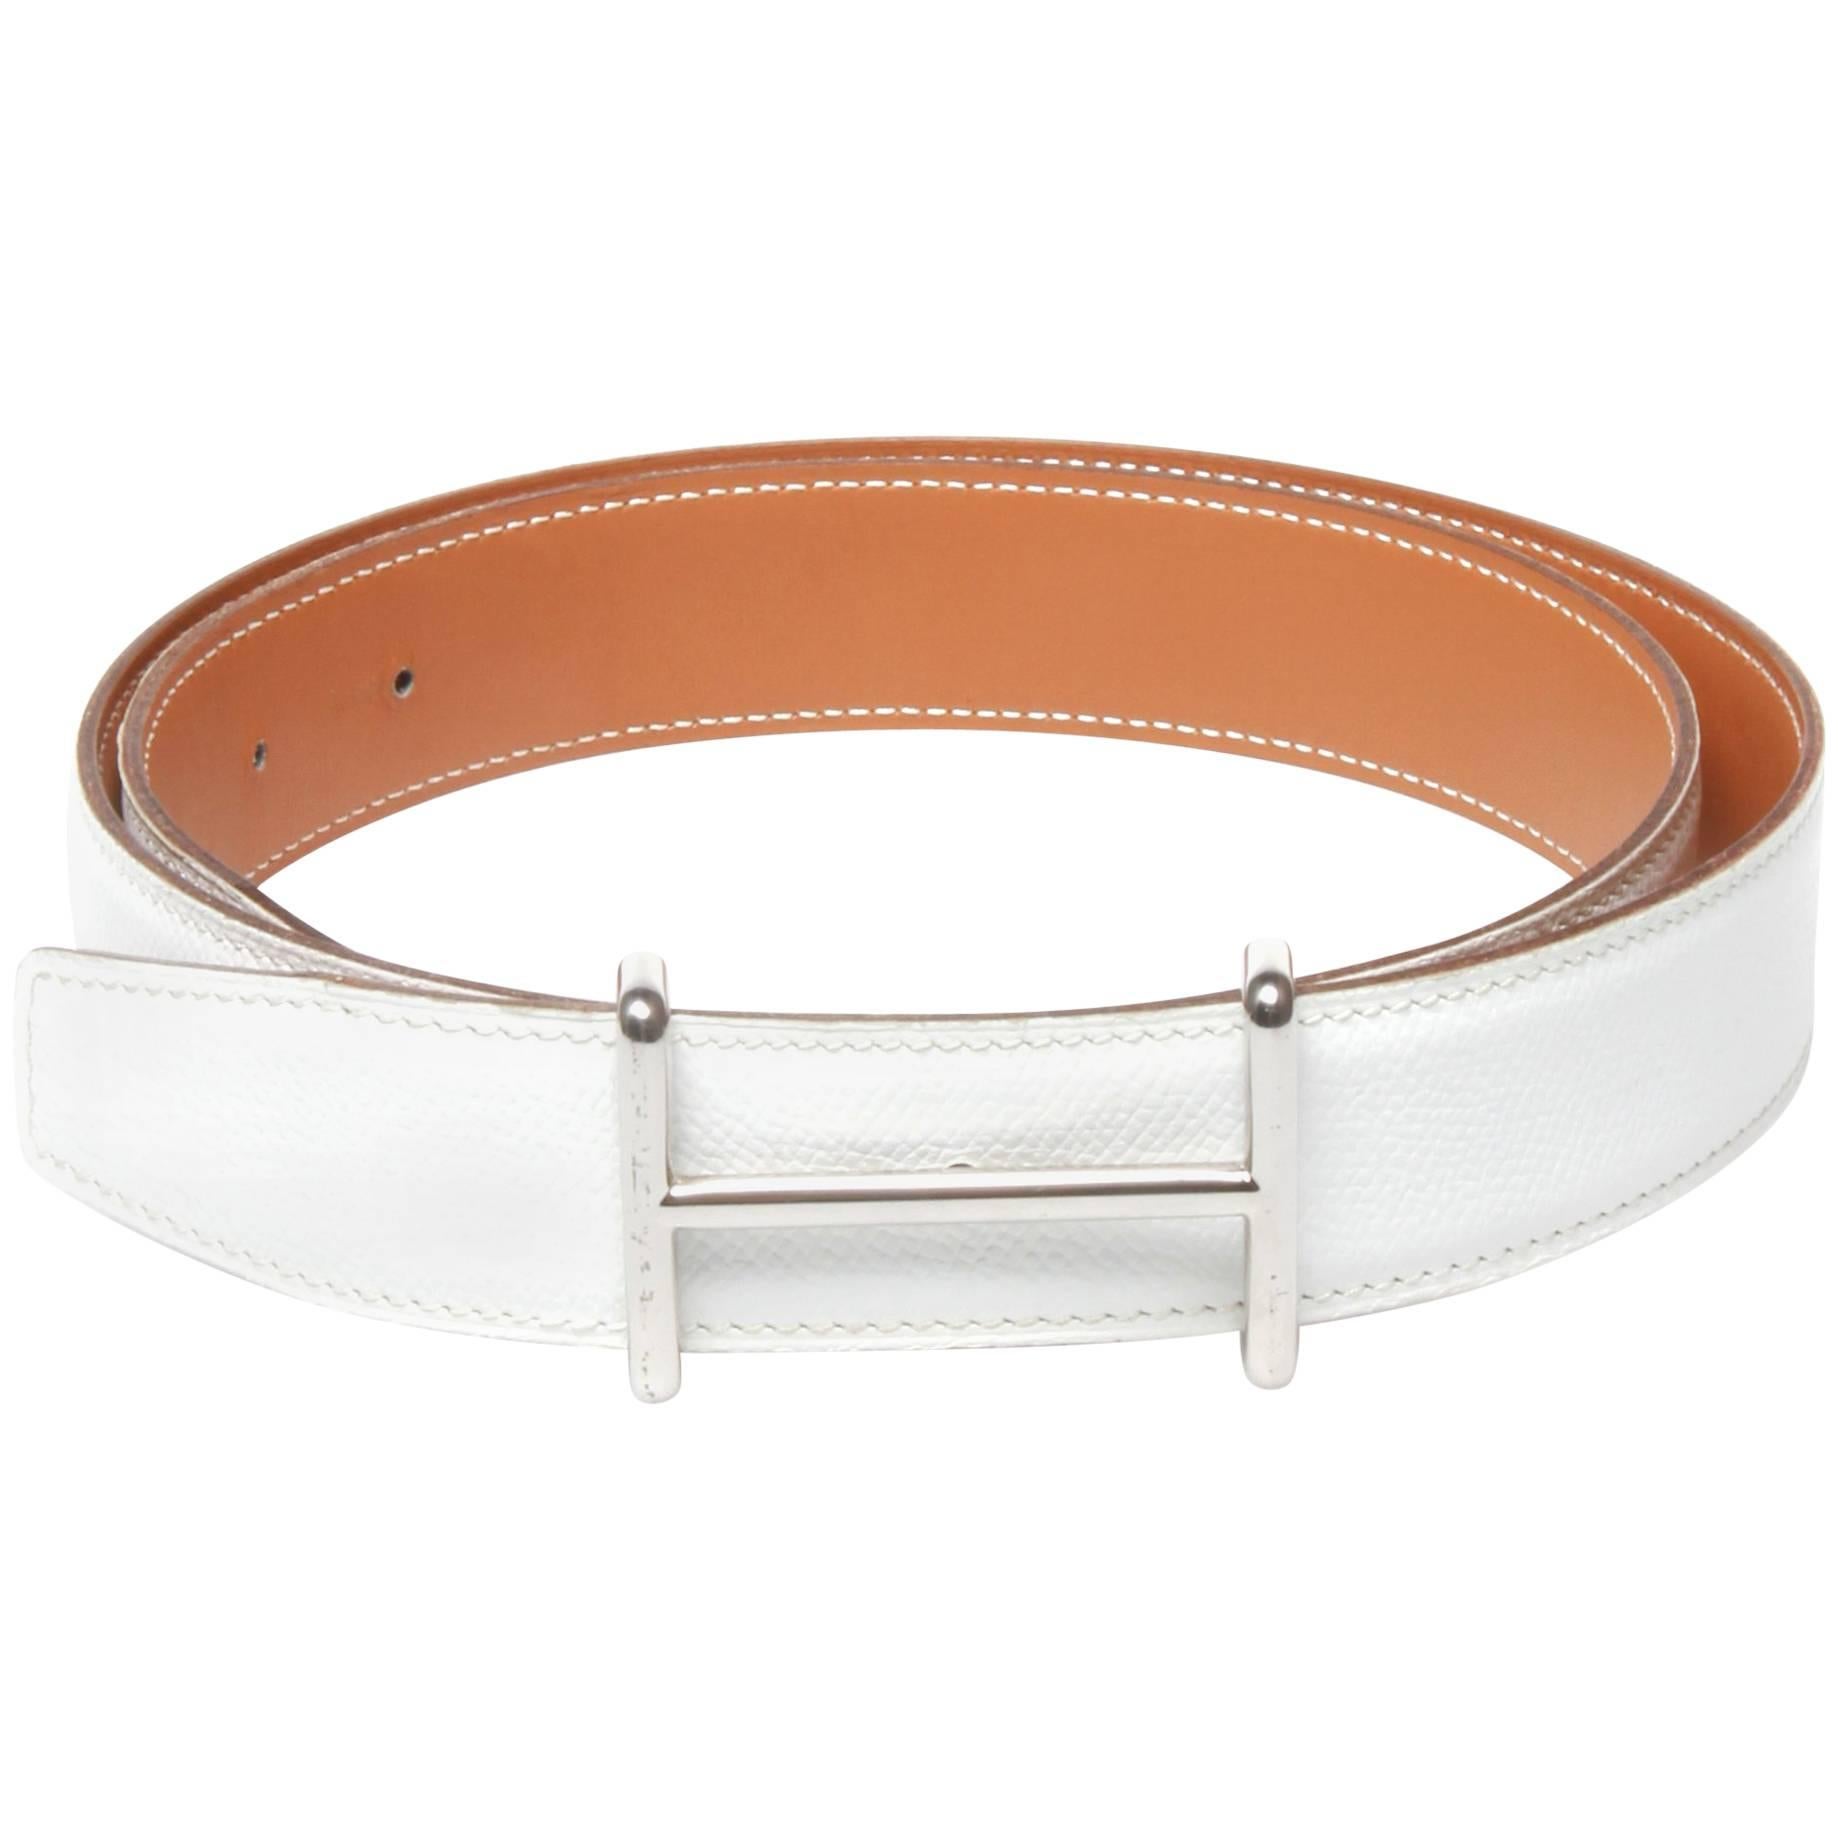 	Hermes H stamp wight leather belt with silver hardware